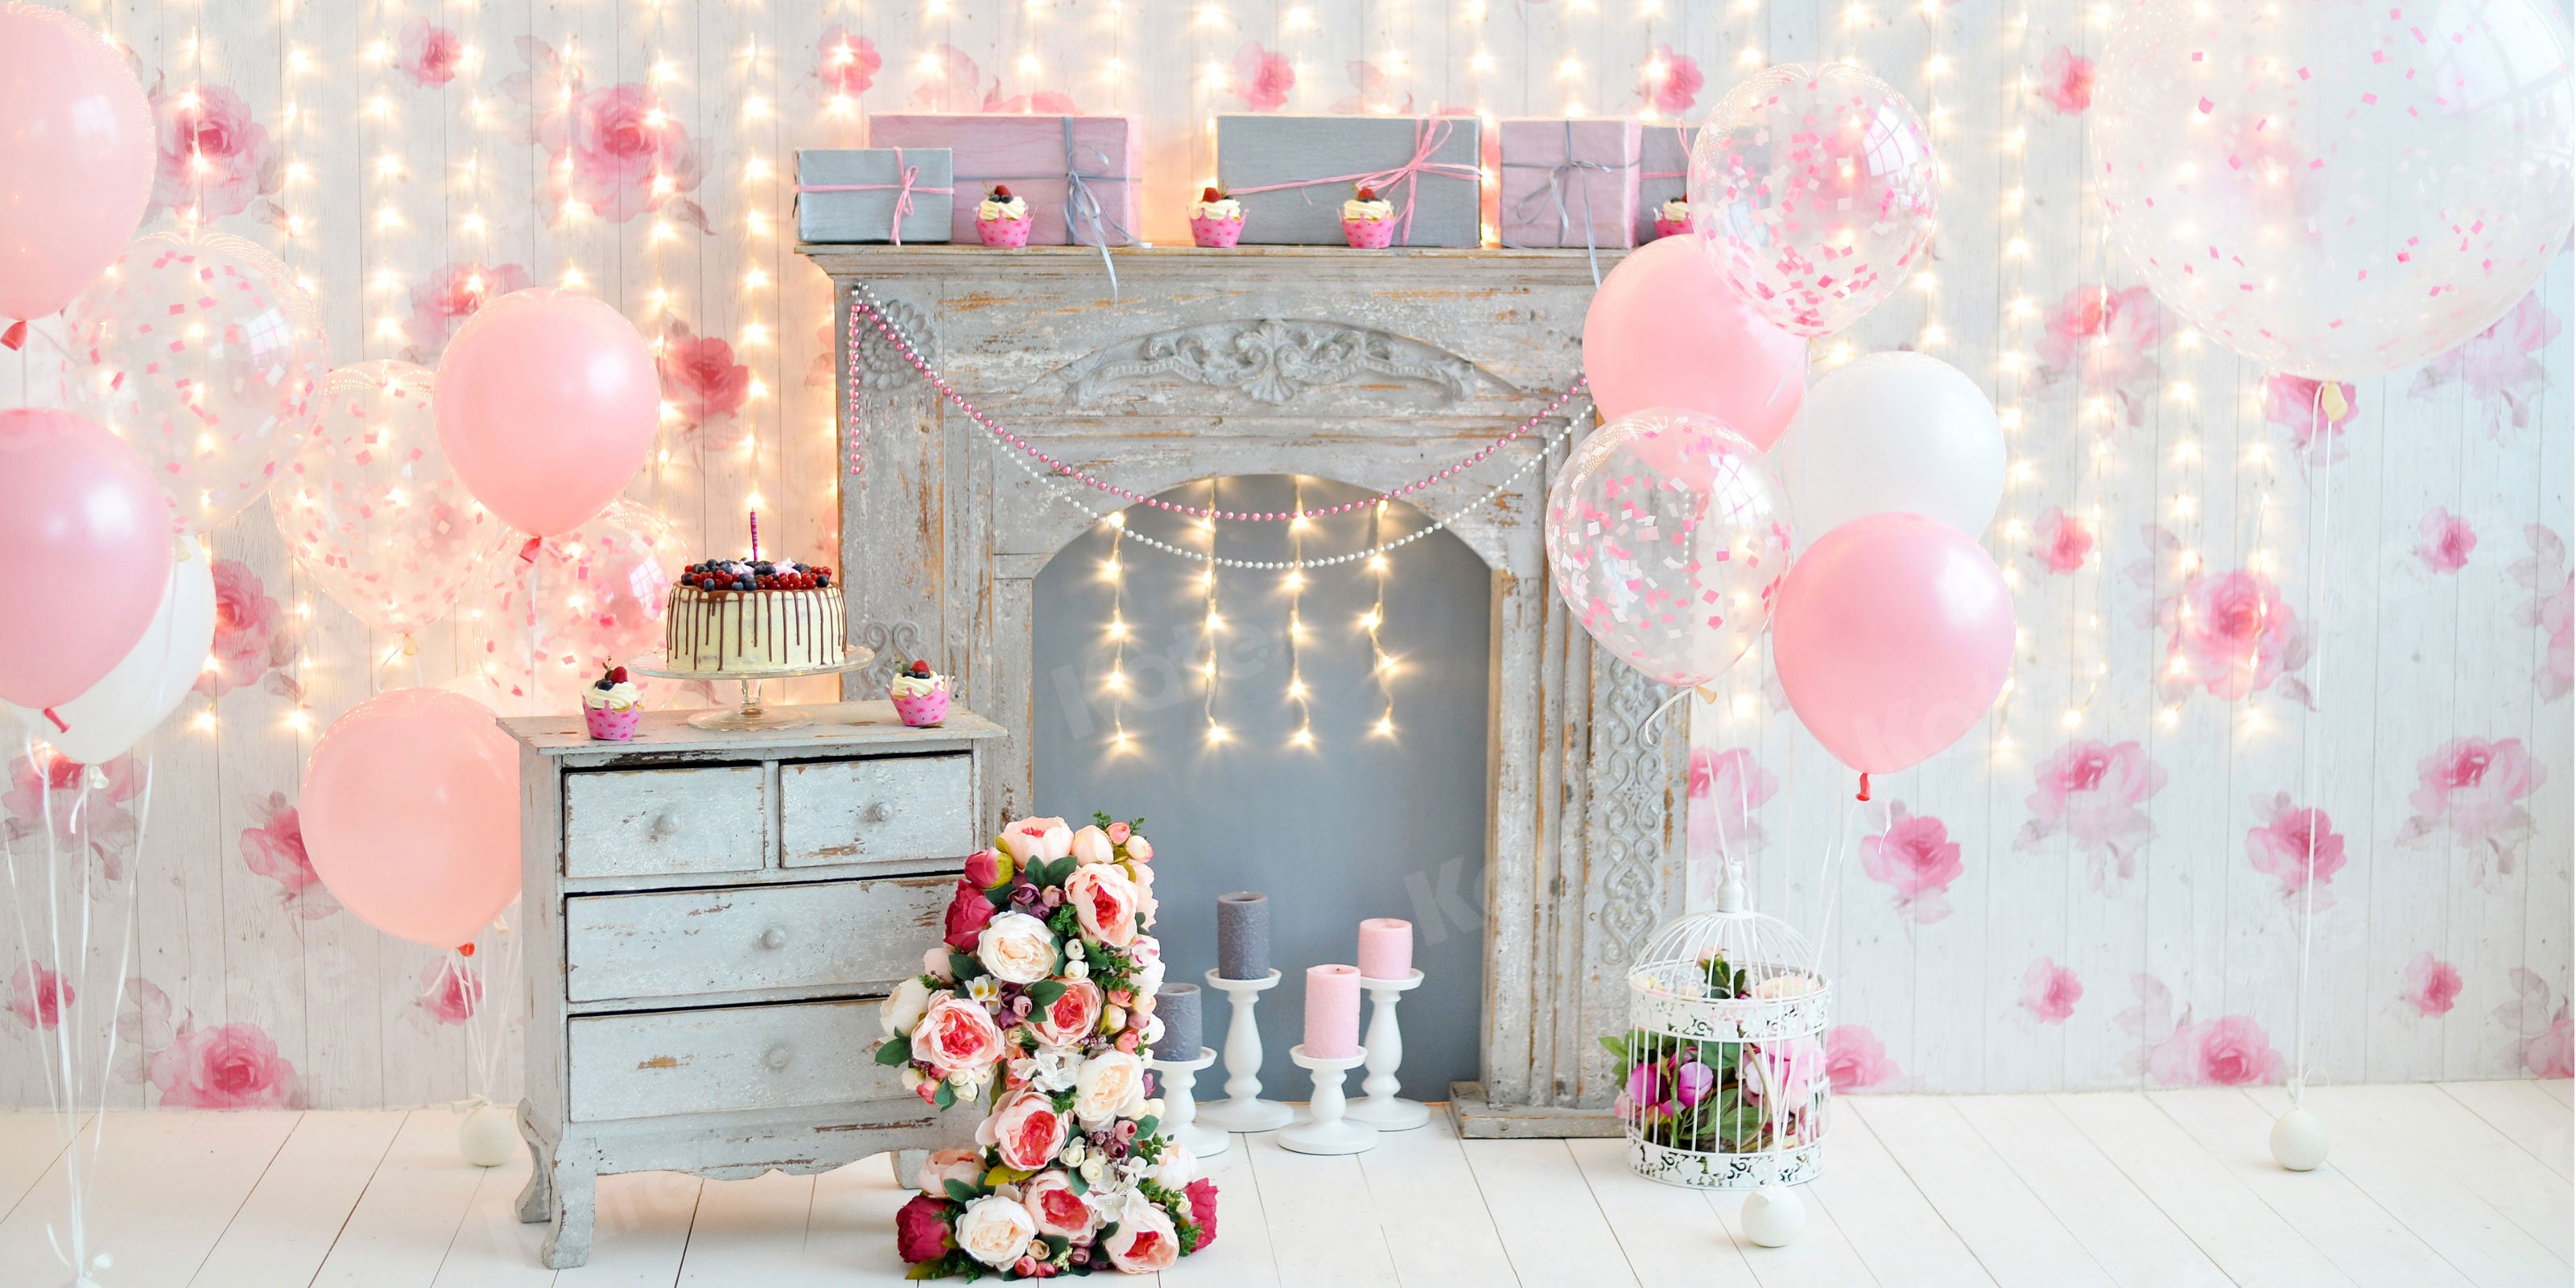 Kate Cake Smash For Party Photography Pink 1st birthday Backdrop Balloons